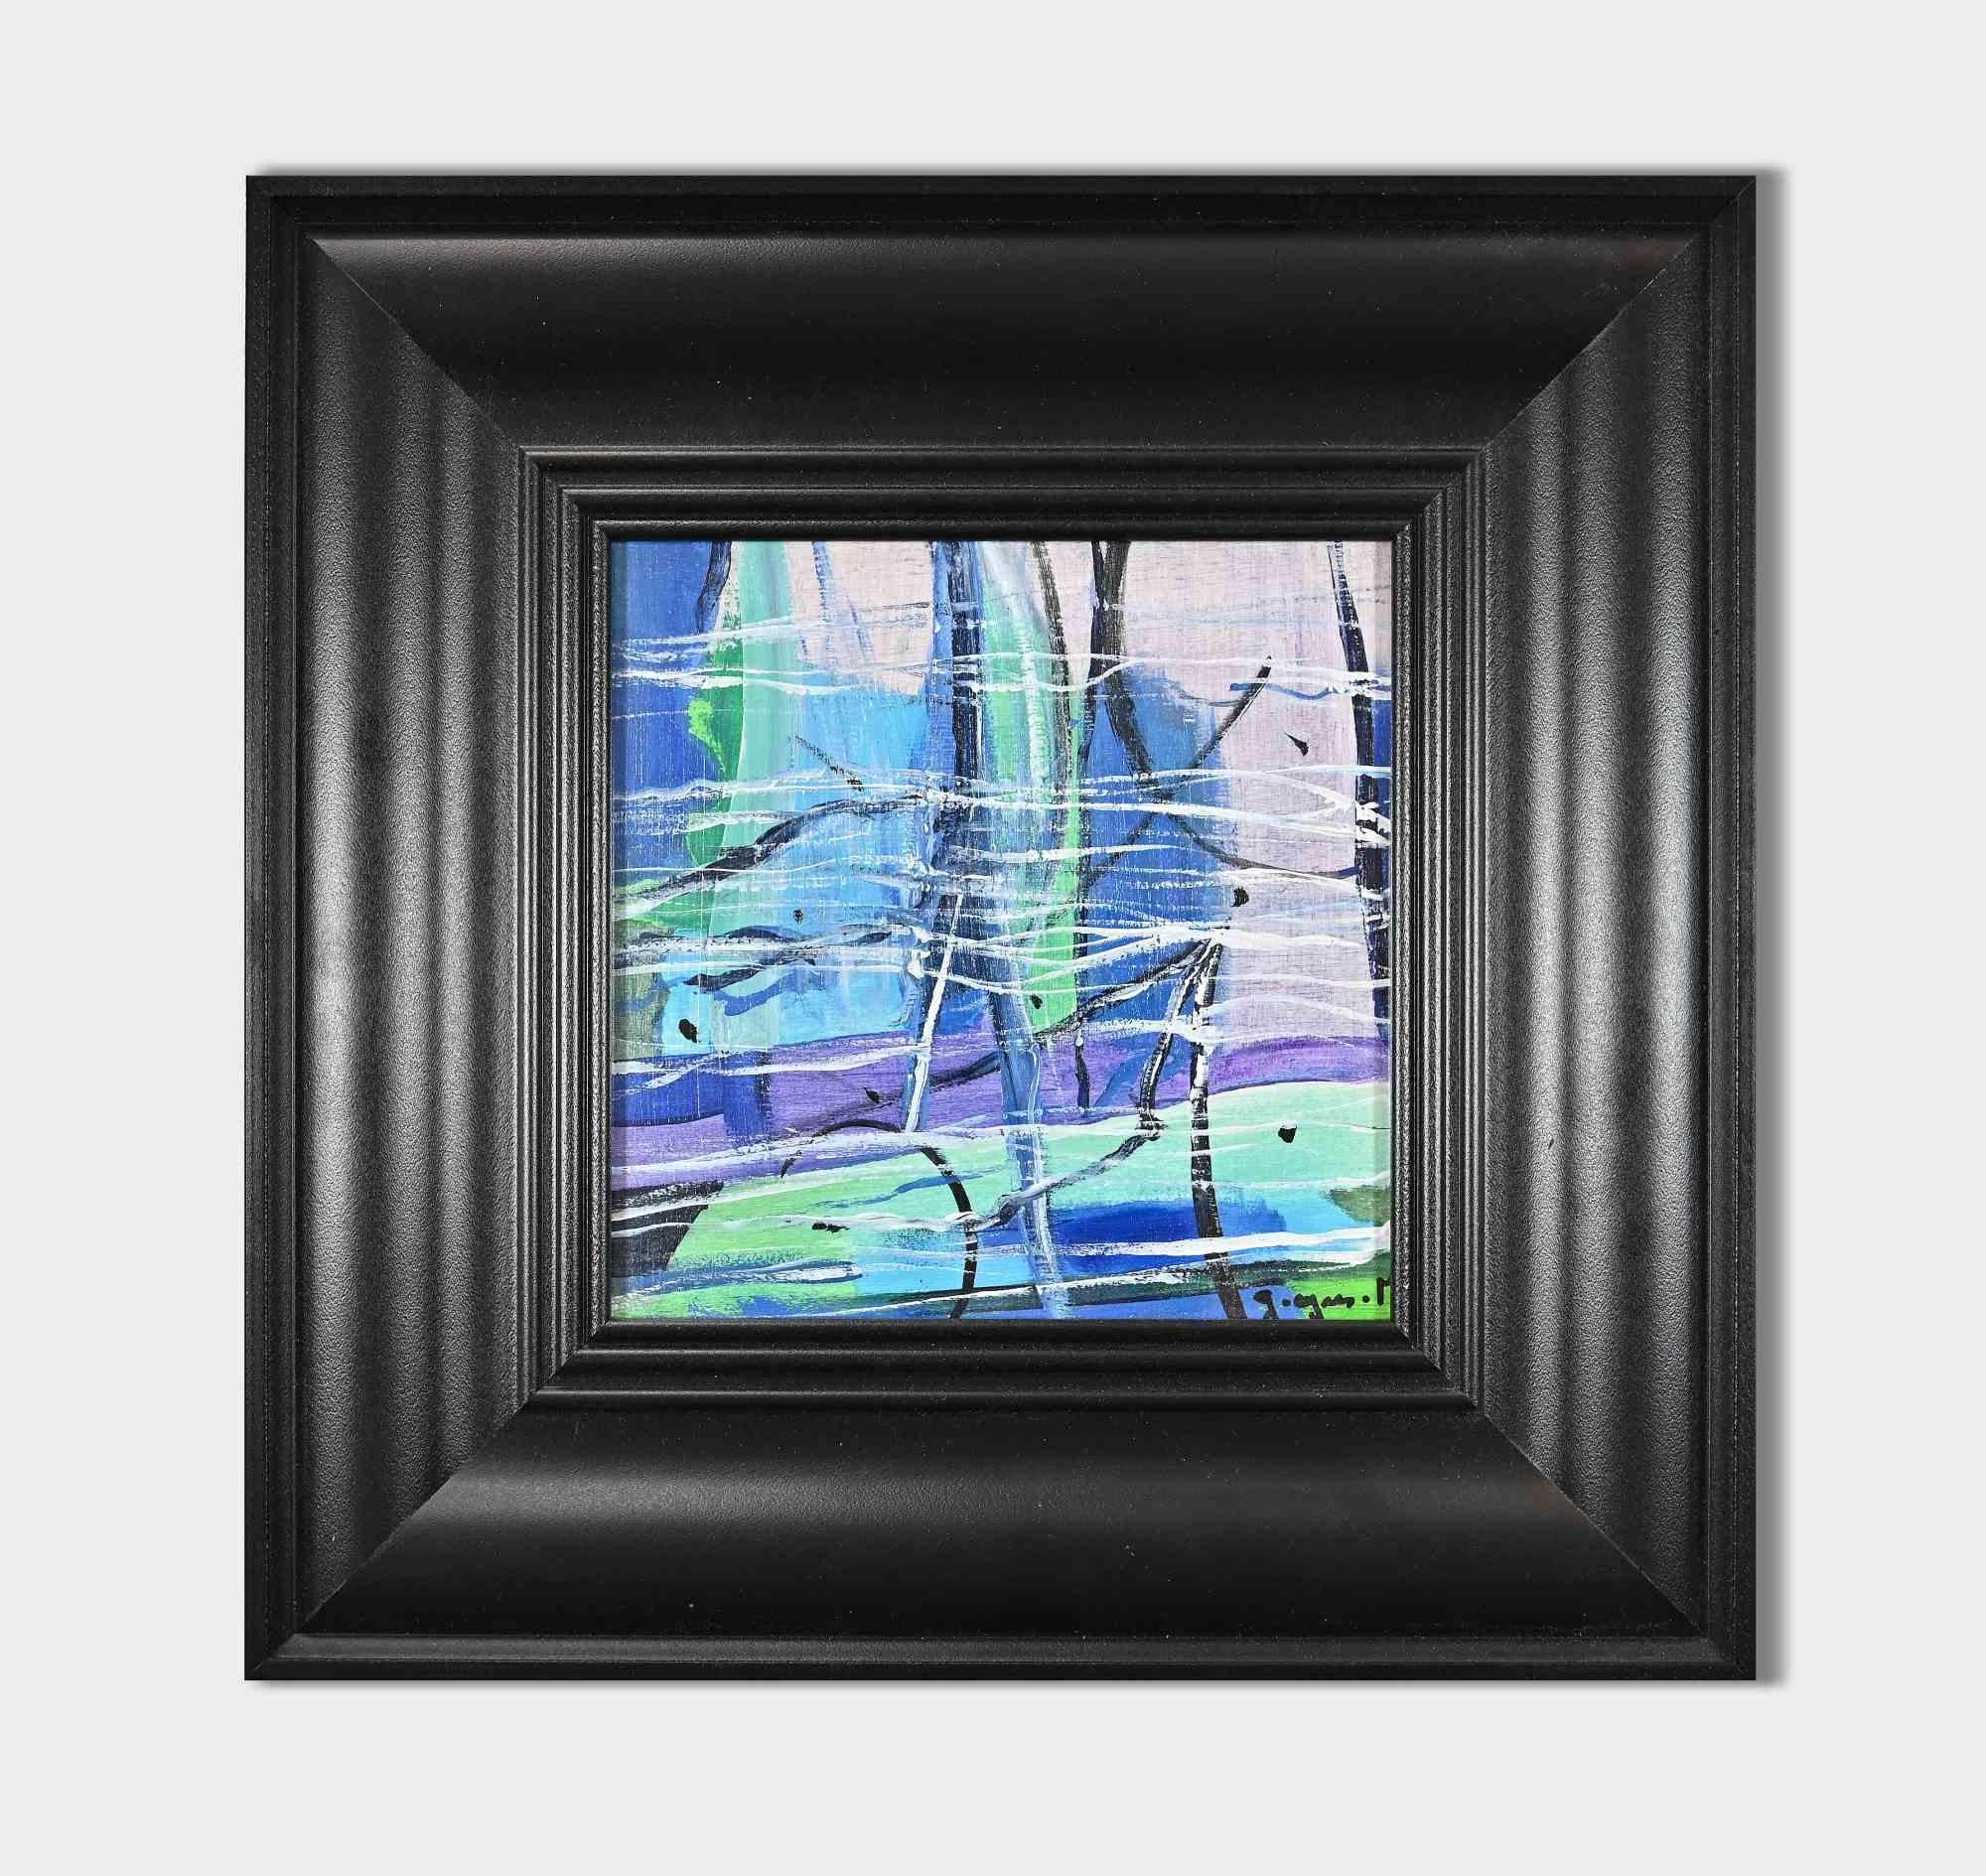 Untitled is an original colored artwork realized by the Belgian artist Martine Goeyens in 2018

Mixed colored acrylic painting on board.

On the back, the label of the certificate of authenticity by the "Fondazione Di Paolo".

Hand-signed on the